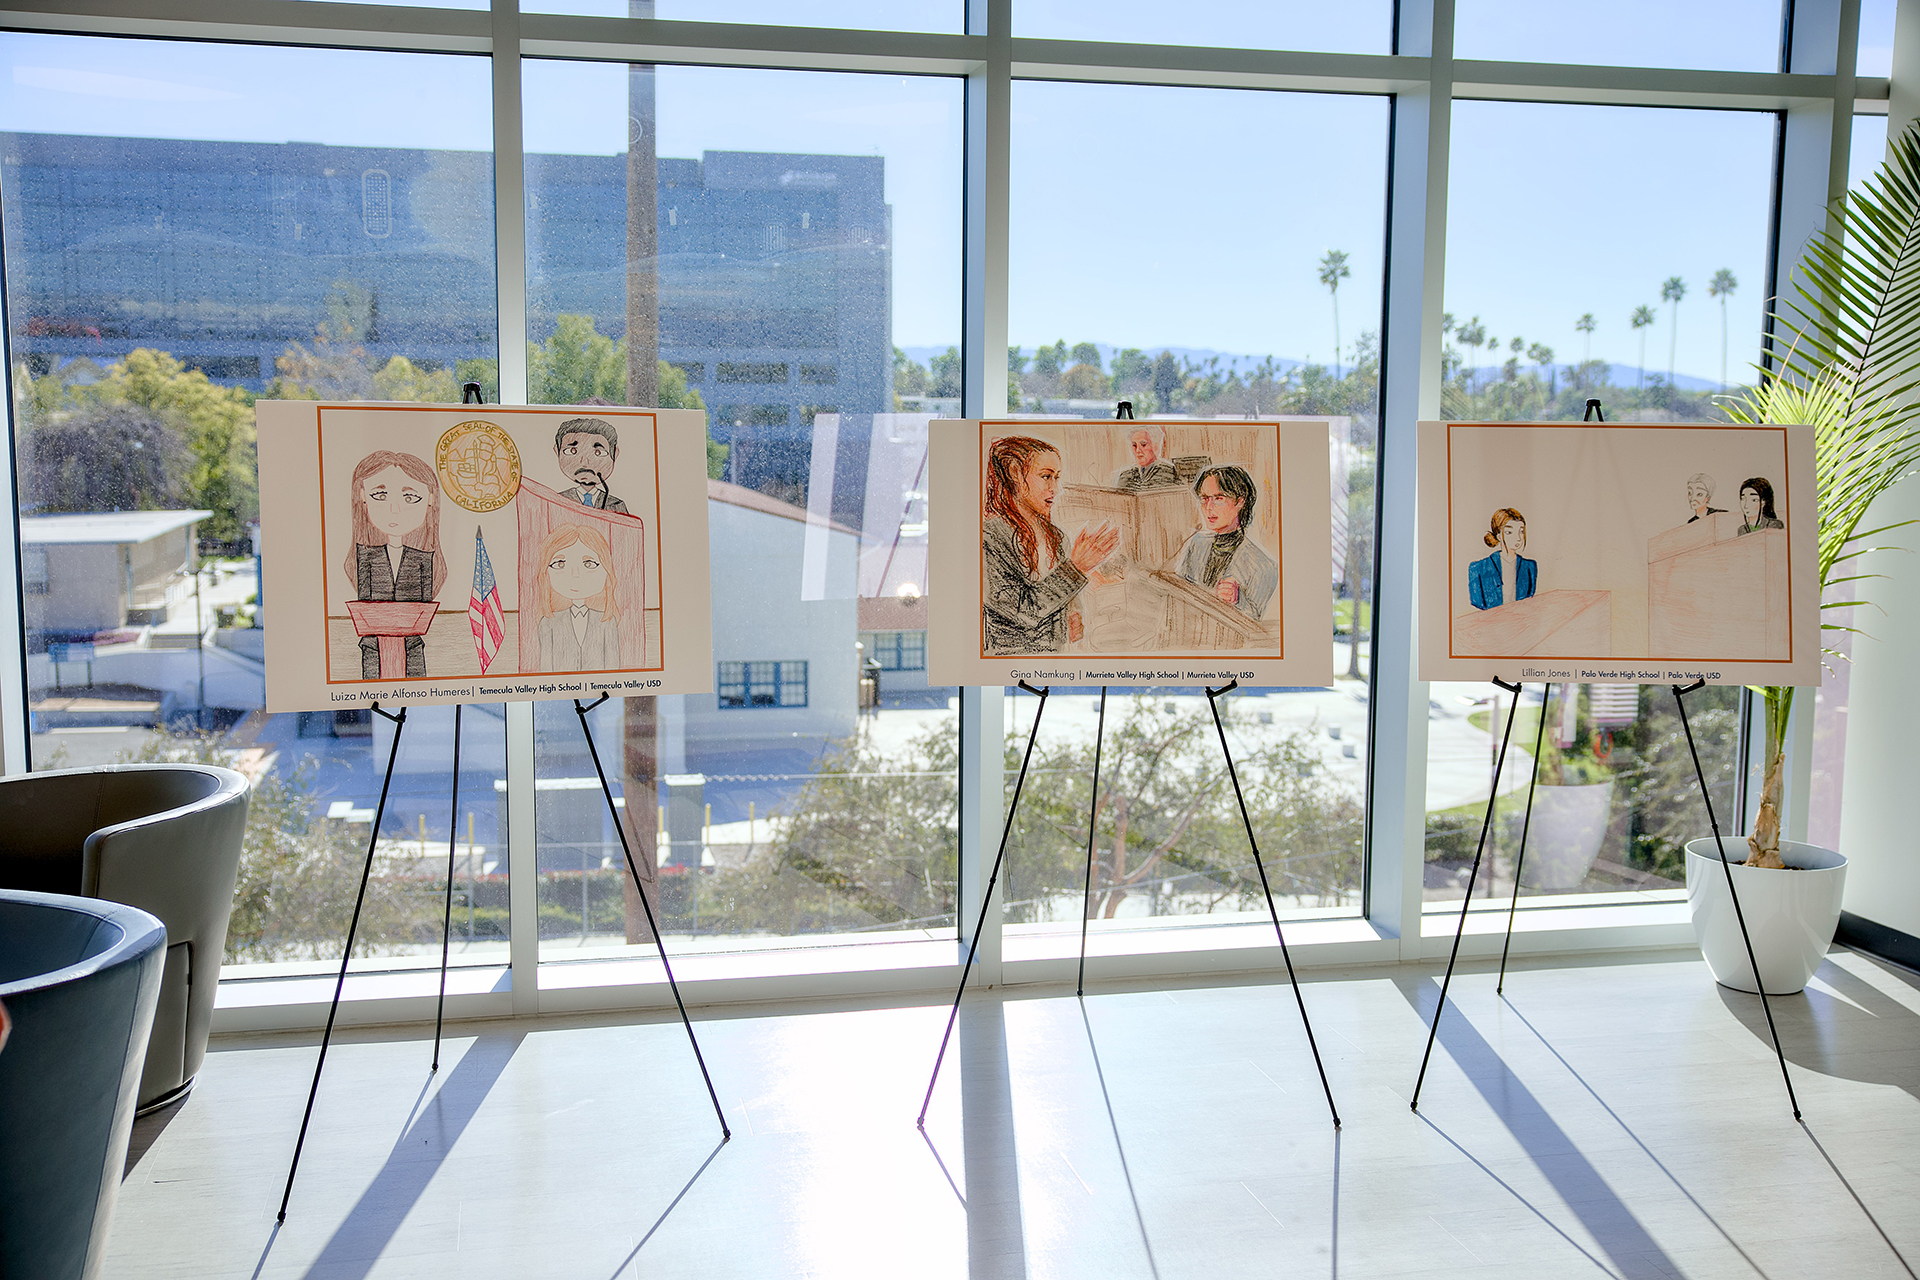 Three works by courtroom artists on display